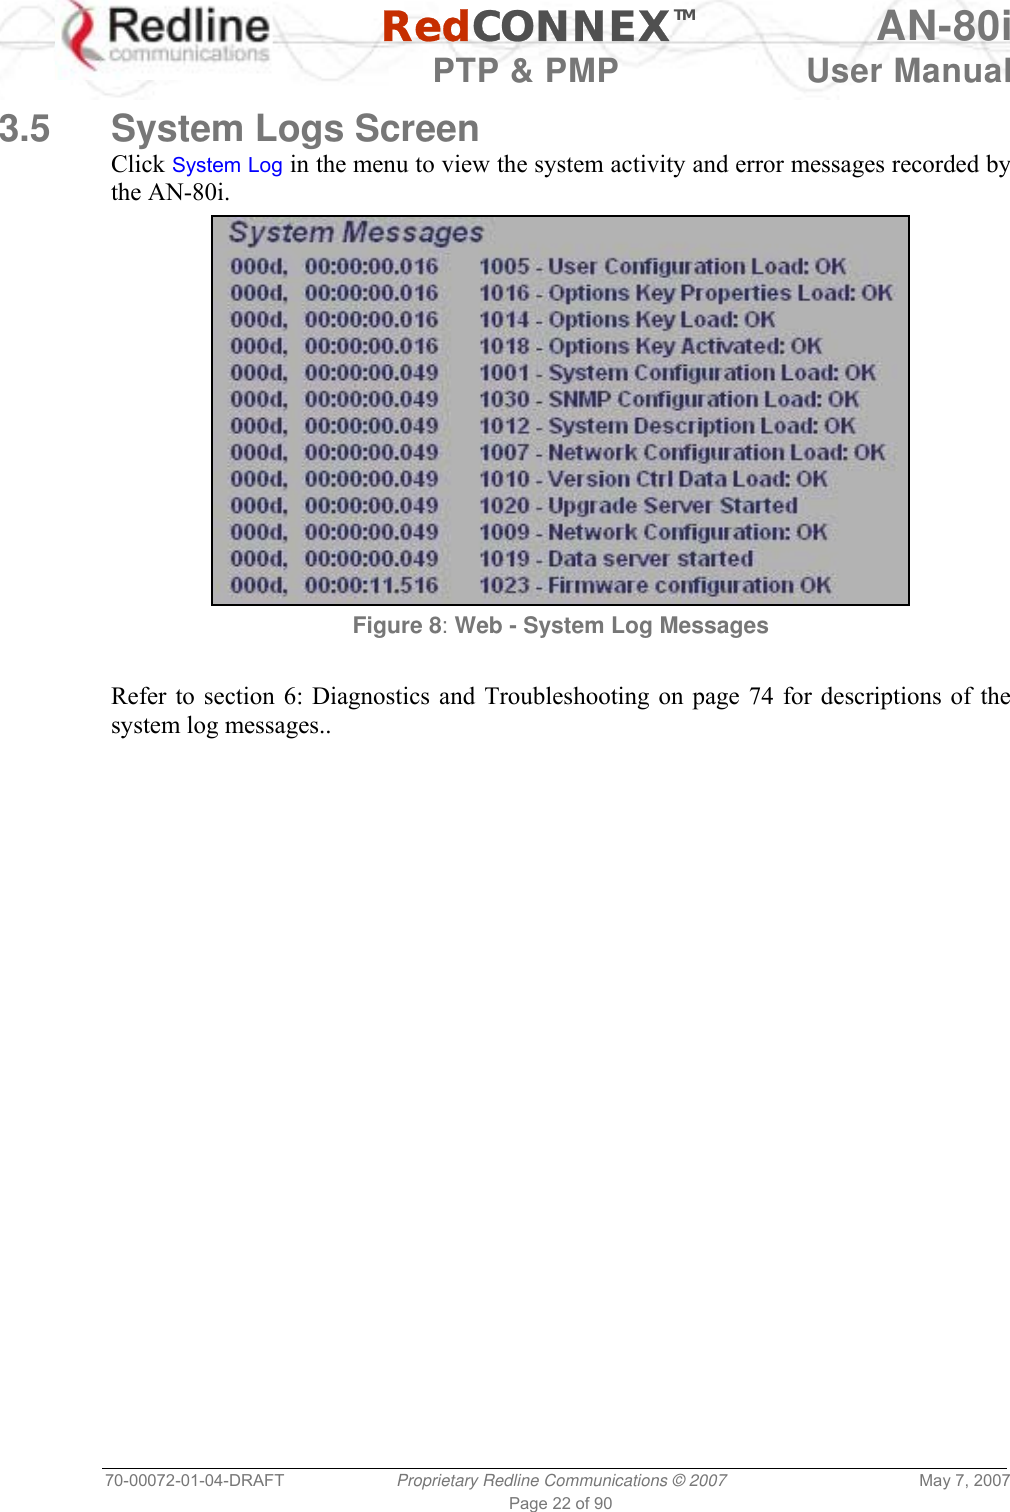   RedCONNEXTM AN-80i   PTP &amp; PMP  User Manual 70-00072-01-04-DRAFT  Proprietary Redline Communications © 2007  May 7, 2007 Page 22 of 90  3.5  System Logs Screen Click System Log in the menu to view the system activity and error messages recorded by the AN-80i.  Figure 8: Web - System Log Messages  Refer to section 6: Diagnostics and Troubleshooting on page 74 for descriptions of the system log messages.. 